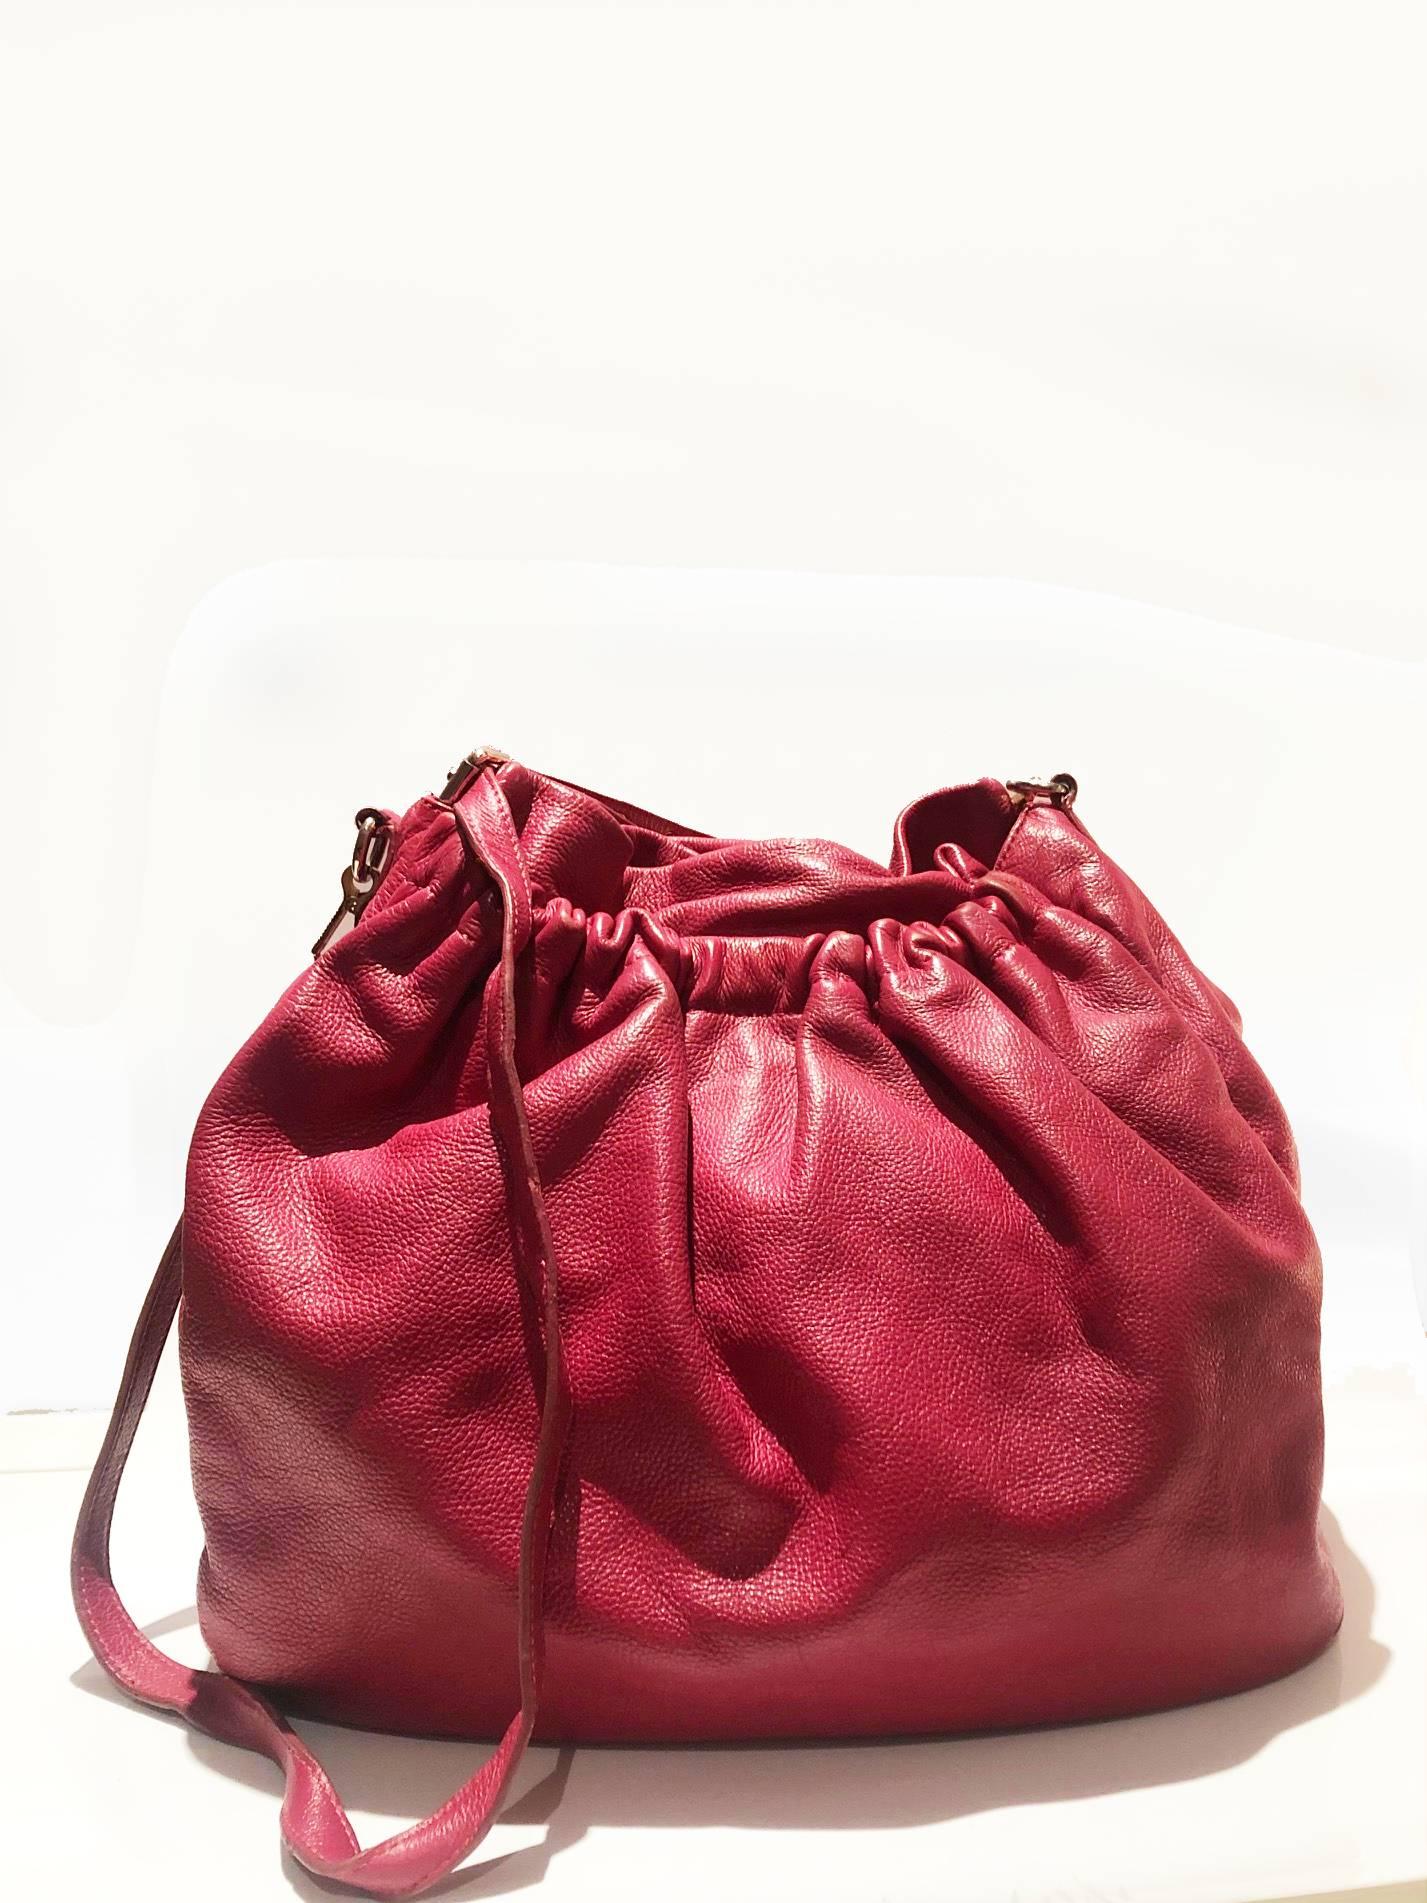 Miu Miu strawberry pink oversized slouch leather hobo bag, double inside compartments, gold-tone hardware, metal lettering logo on the side, snap closure, cotton purple satin lining with zipper pocket and patch pocket

Condition: good, 2000s, some